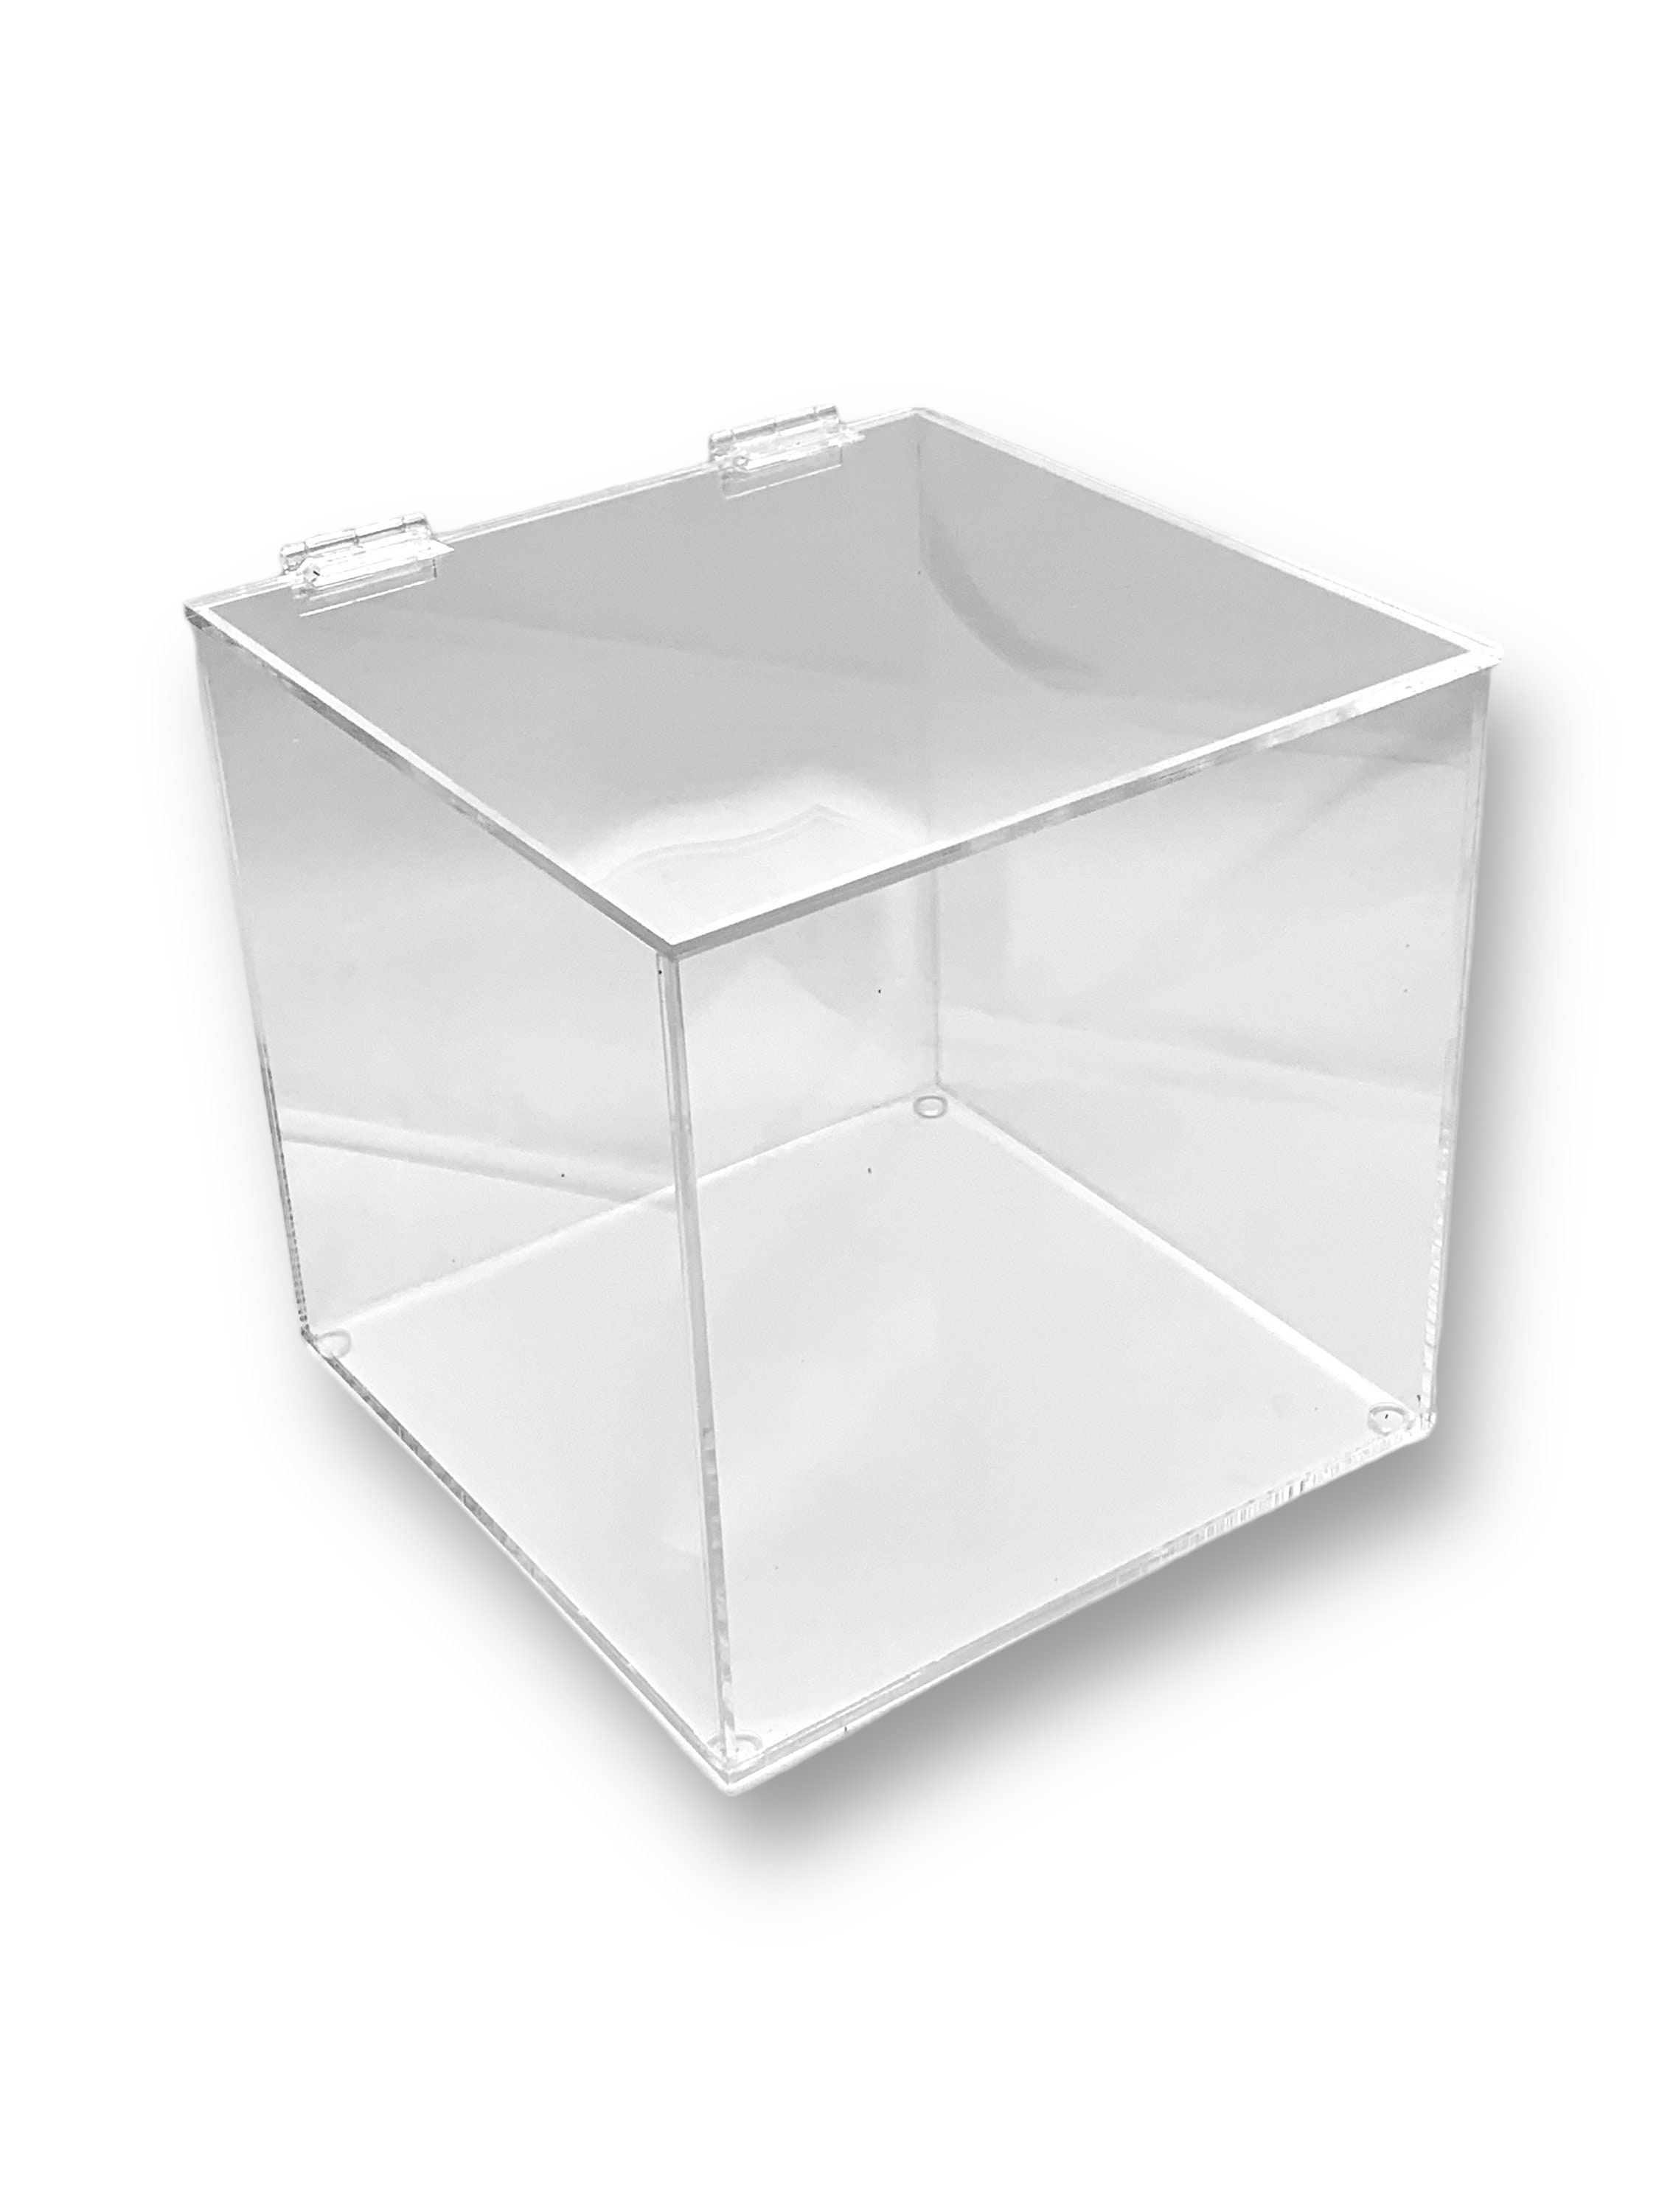 Kissyou Clear Acrylic Box Plastic Square Cube 8 Pieces Small Clear Box with Lids Wedding Party Gift Boxes Birthday Storage Container Candy Box